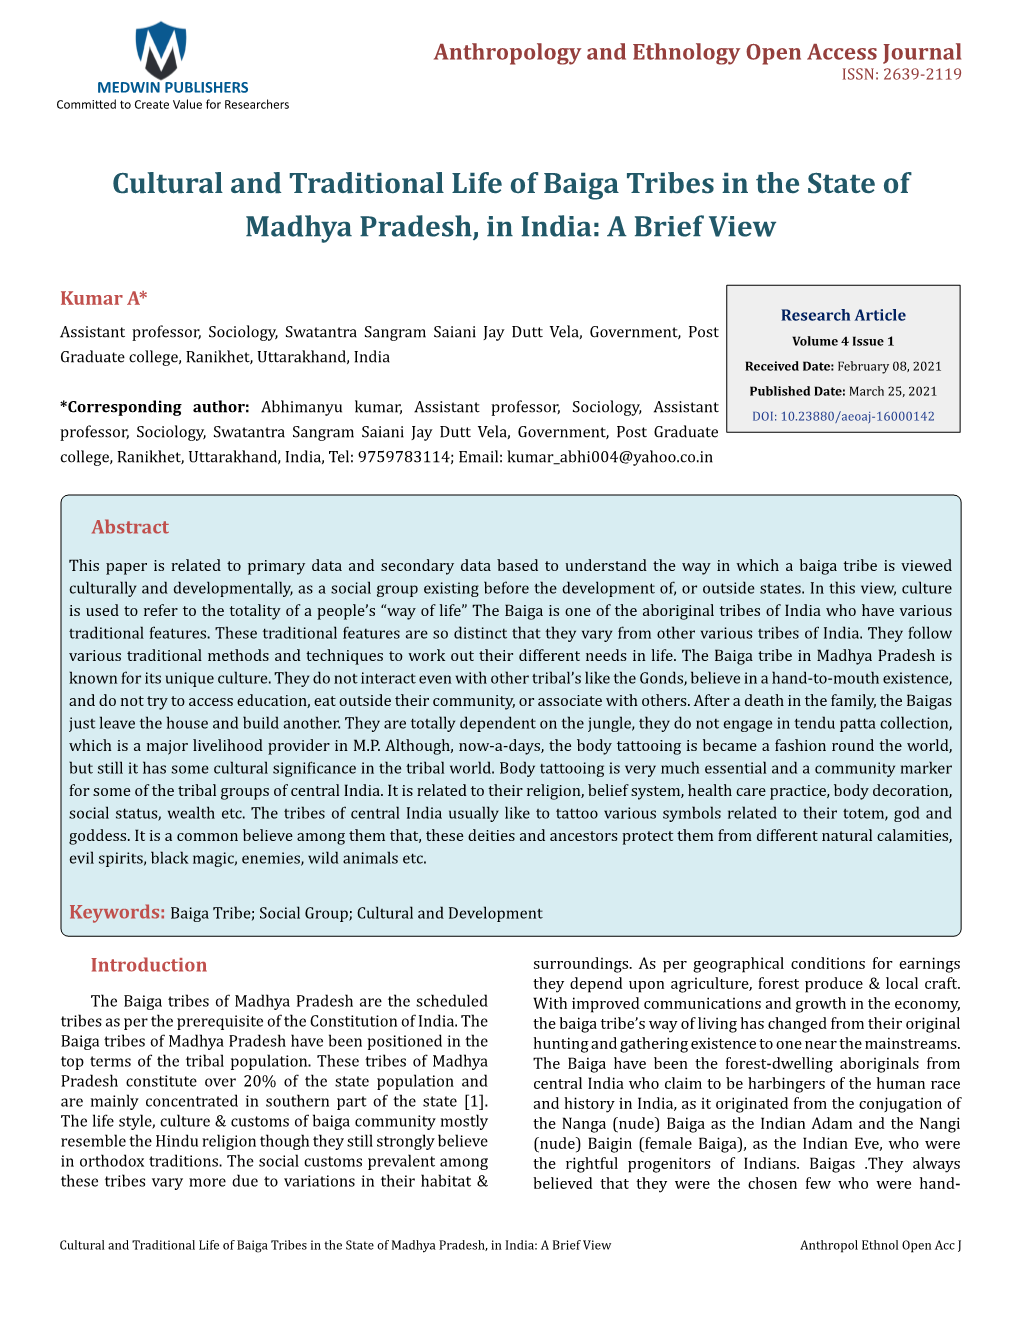 Cultural and Traditional Life of Baiga Tribes in the State of Madhya Pradesh, in India: a Brief View